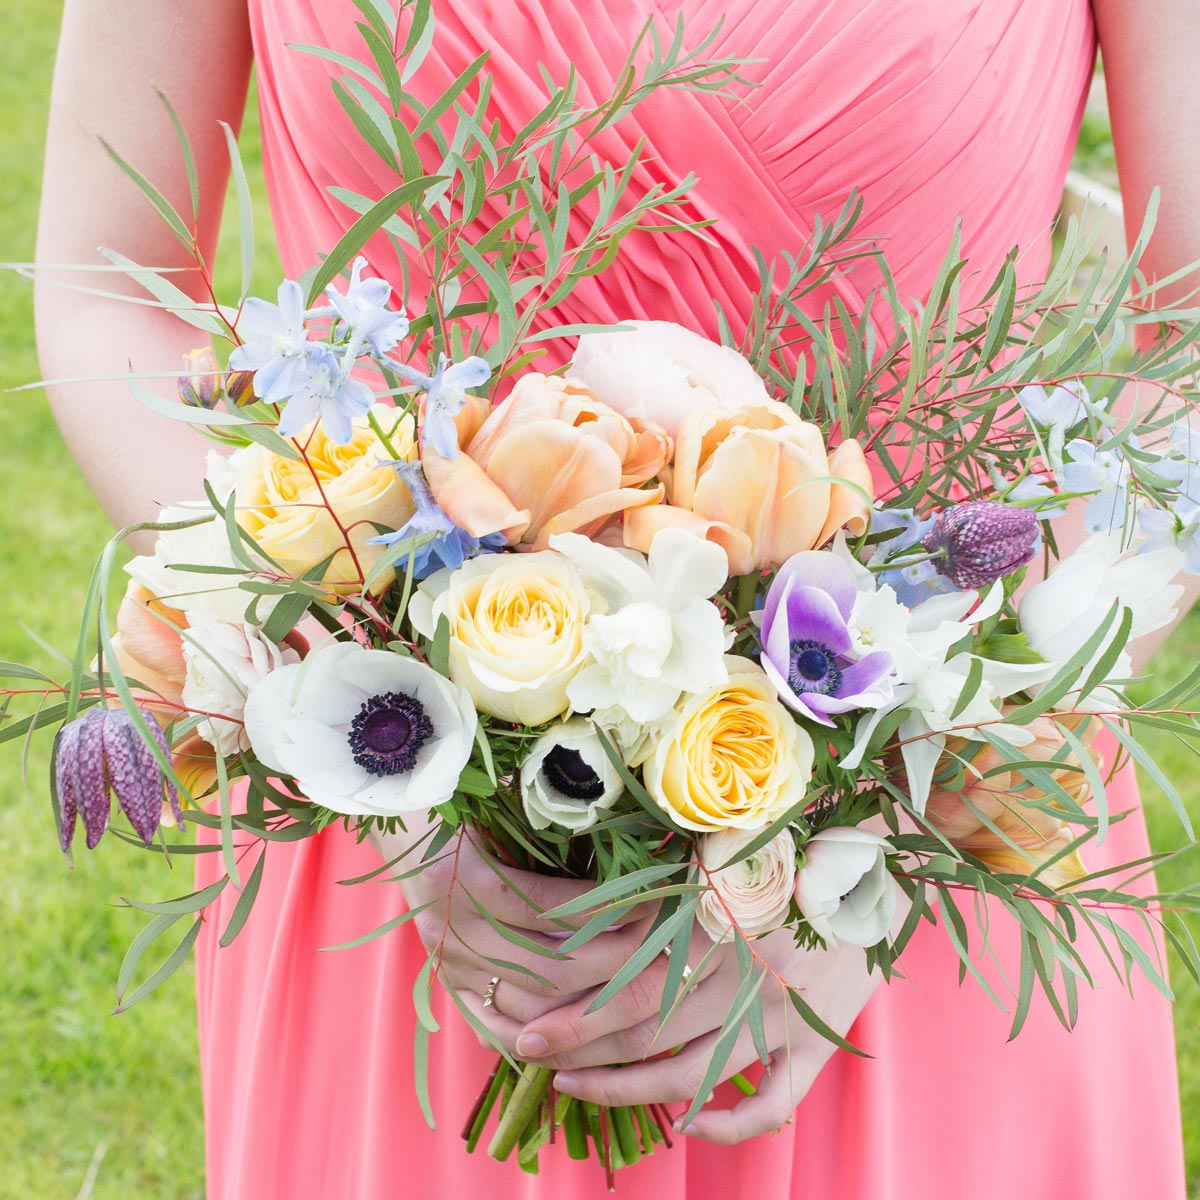 Woman in a pink bridesmaid dress holding a bouquet of spring wedding flowers